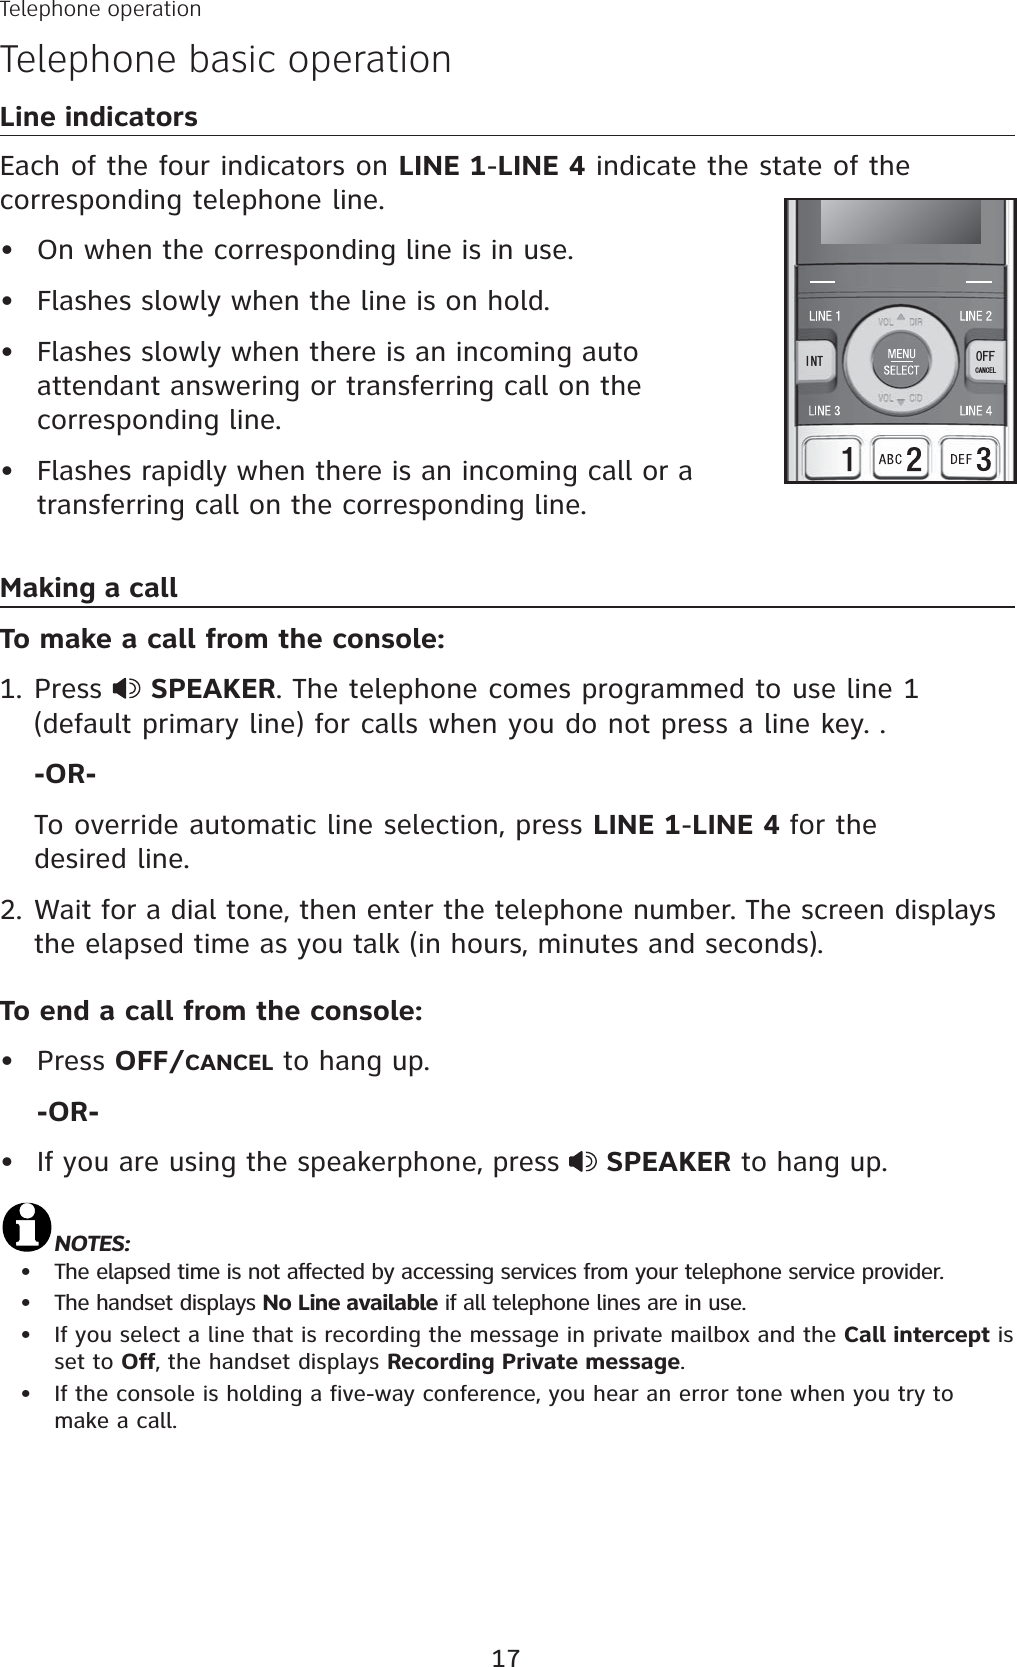 17Line indicatorsEach of the four indicators on LINE 1-LINE 4 indicate the state of the corresponding telephone line. On when the corresponding line is in use.Flashes slowly when the line is on hold.Flashes slowly when there is an incoming auto attendant answering or transferring call on the corresponding line. Flashes rapidly when there is an incoming call or a transferring call on the corresponding line.Making a callTo make a call from the console:Press  SPEAKER. The telephone comes programmed to use line 1 (default primary line) for calls when you do not press a line key. . -OR-To override automatic line selection, press LINE 1-LINE 4 for the desired line. 2. Wait for a dial tone, then enter the telephone number. The screen displays the elapsed time as you talk (in hours, minutes and seconds). To end a call from the console:Press OFF/CANCEL to hang up.-OR-If you are using the speakerphone, press  SPEAKER to hang up.NOTES: The elapsed time is not affected by accessing services from your telephone service provider.The handset displays No Line available if all telephone lines are in use.If you select a line that is recording the message in private mailbox and the Call intercept is set to Off, the handset displays Recording Private message.If the console is holding a five-way conference, you hear an error tone when you try to make a call.••••1.••••••+06 1((%#0%&apos;.Telephone operationTelephone basic operation